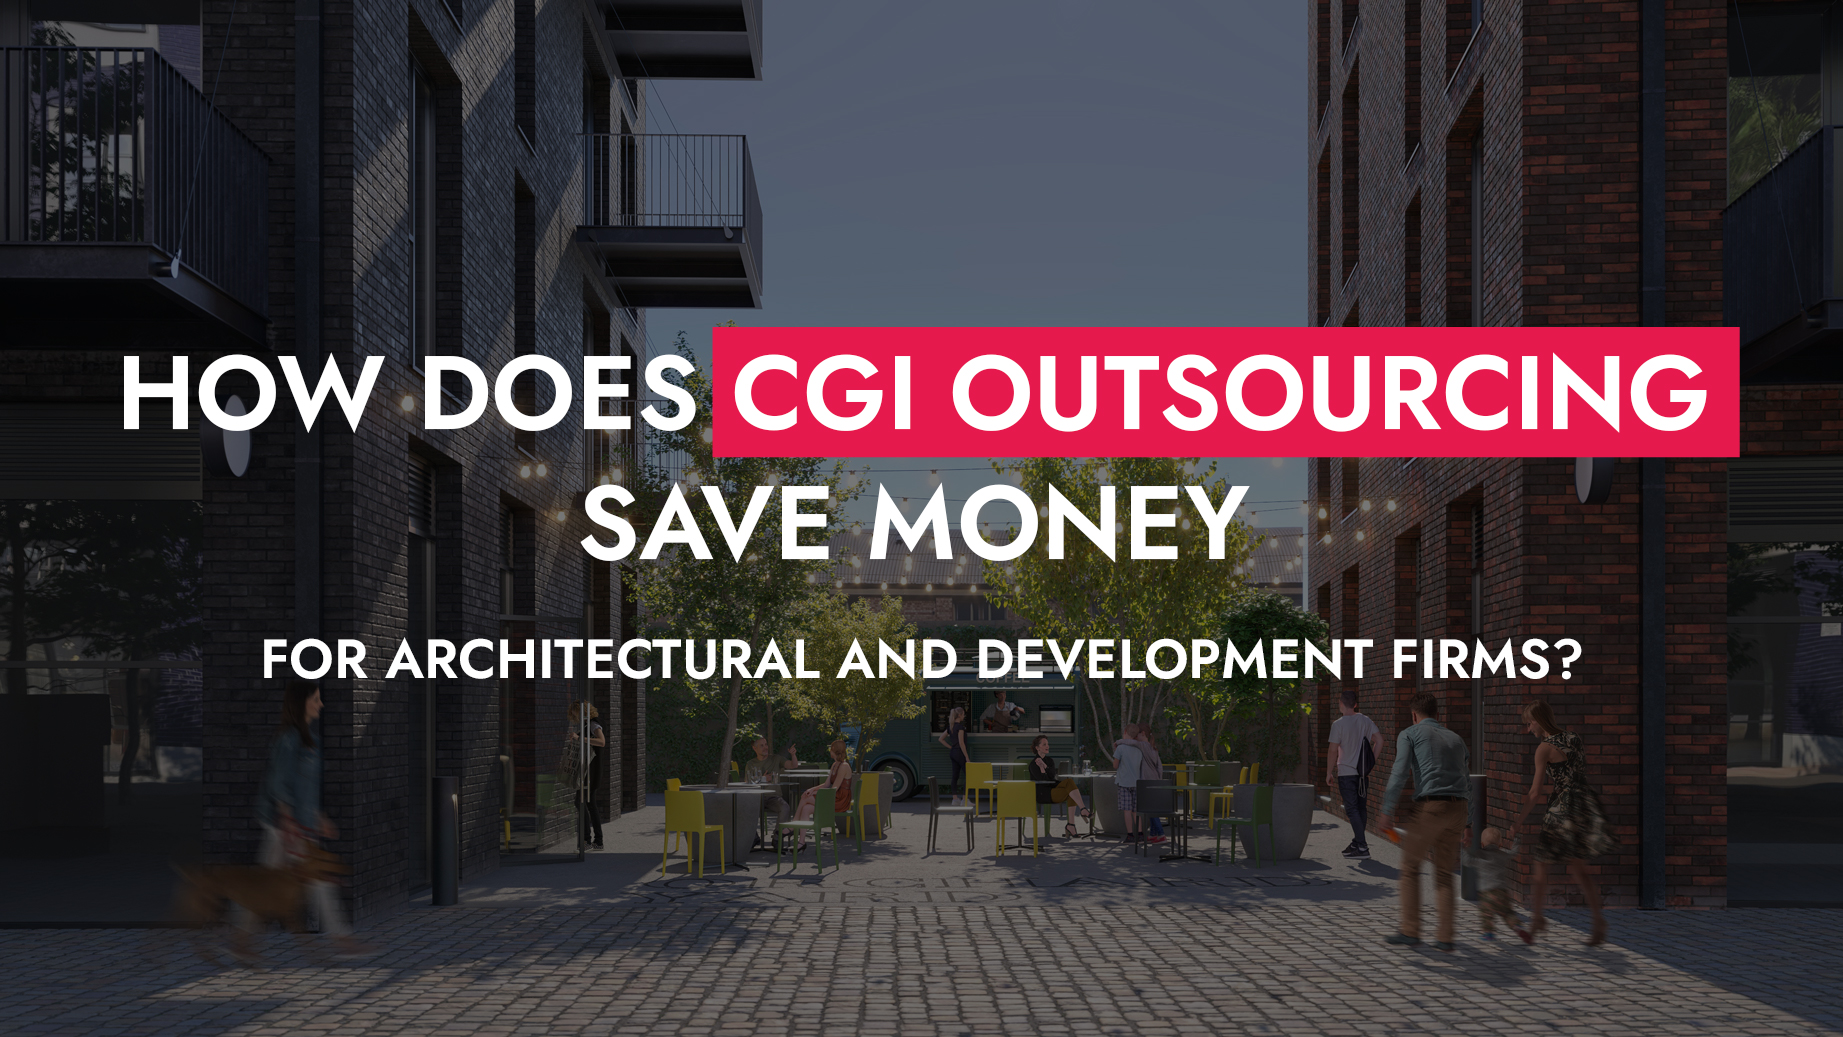 002 24 23 How Does CGI Outsourcing Save Money For Architectural And Development Firms